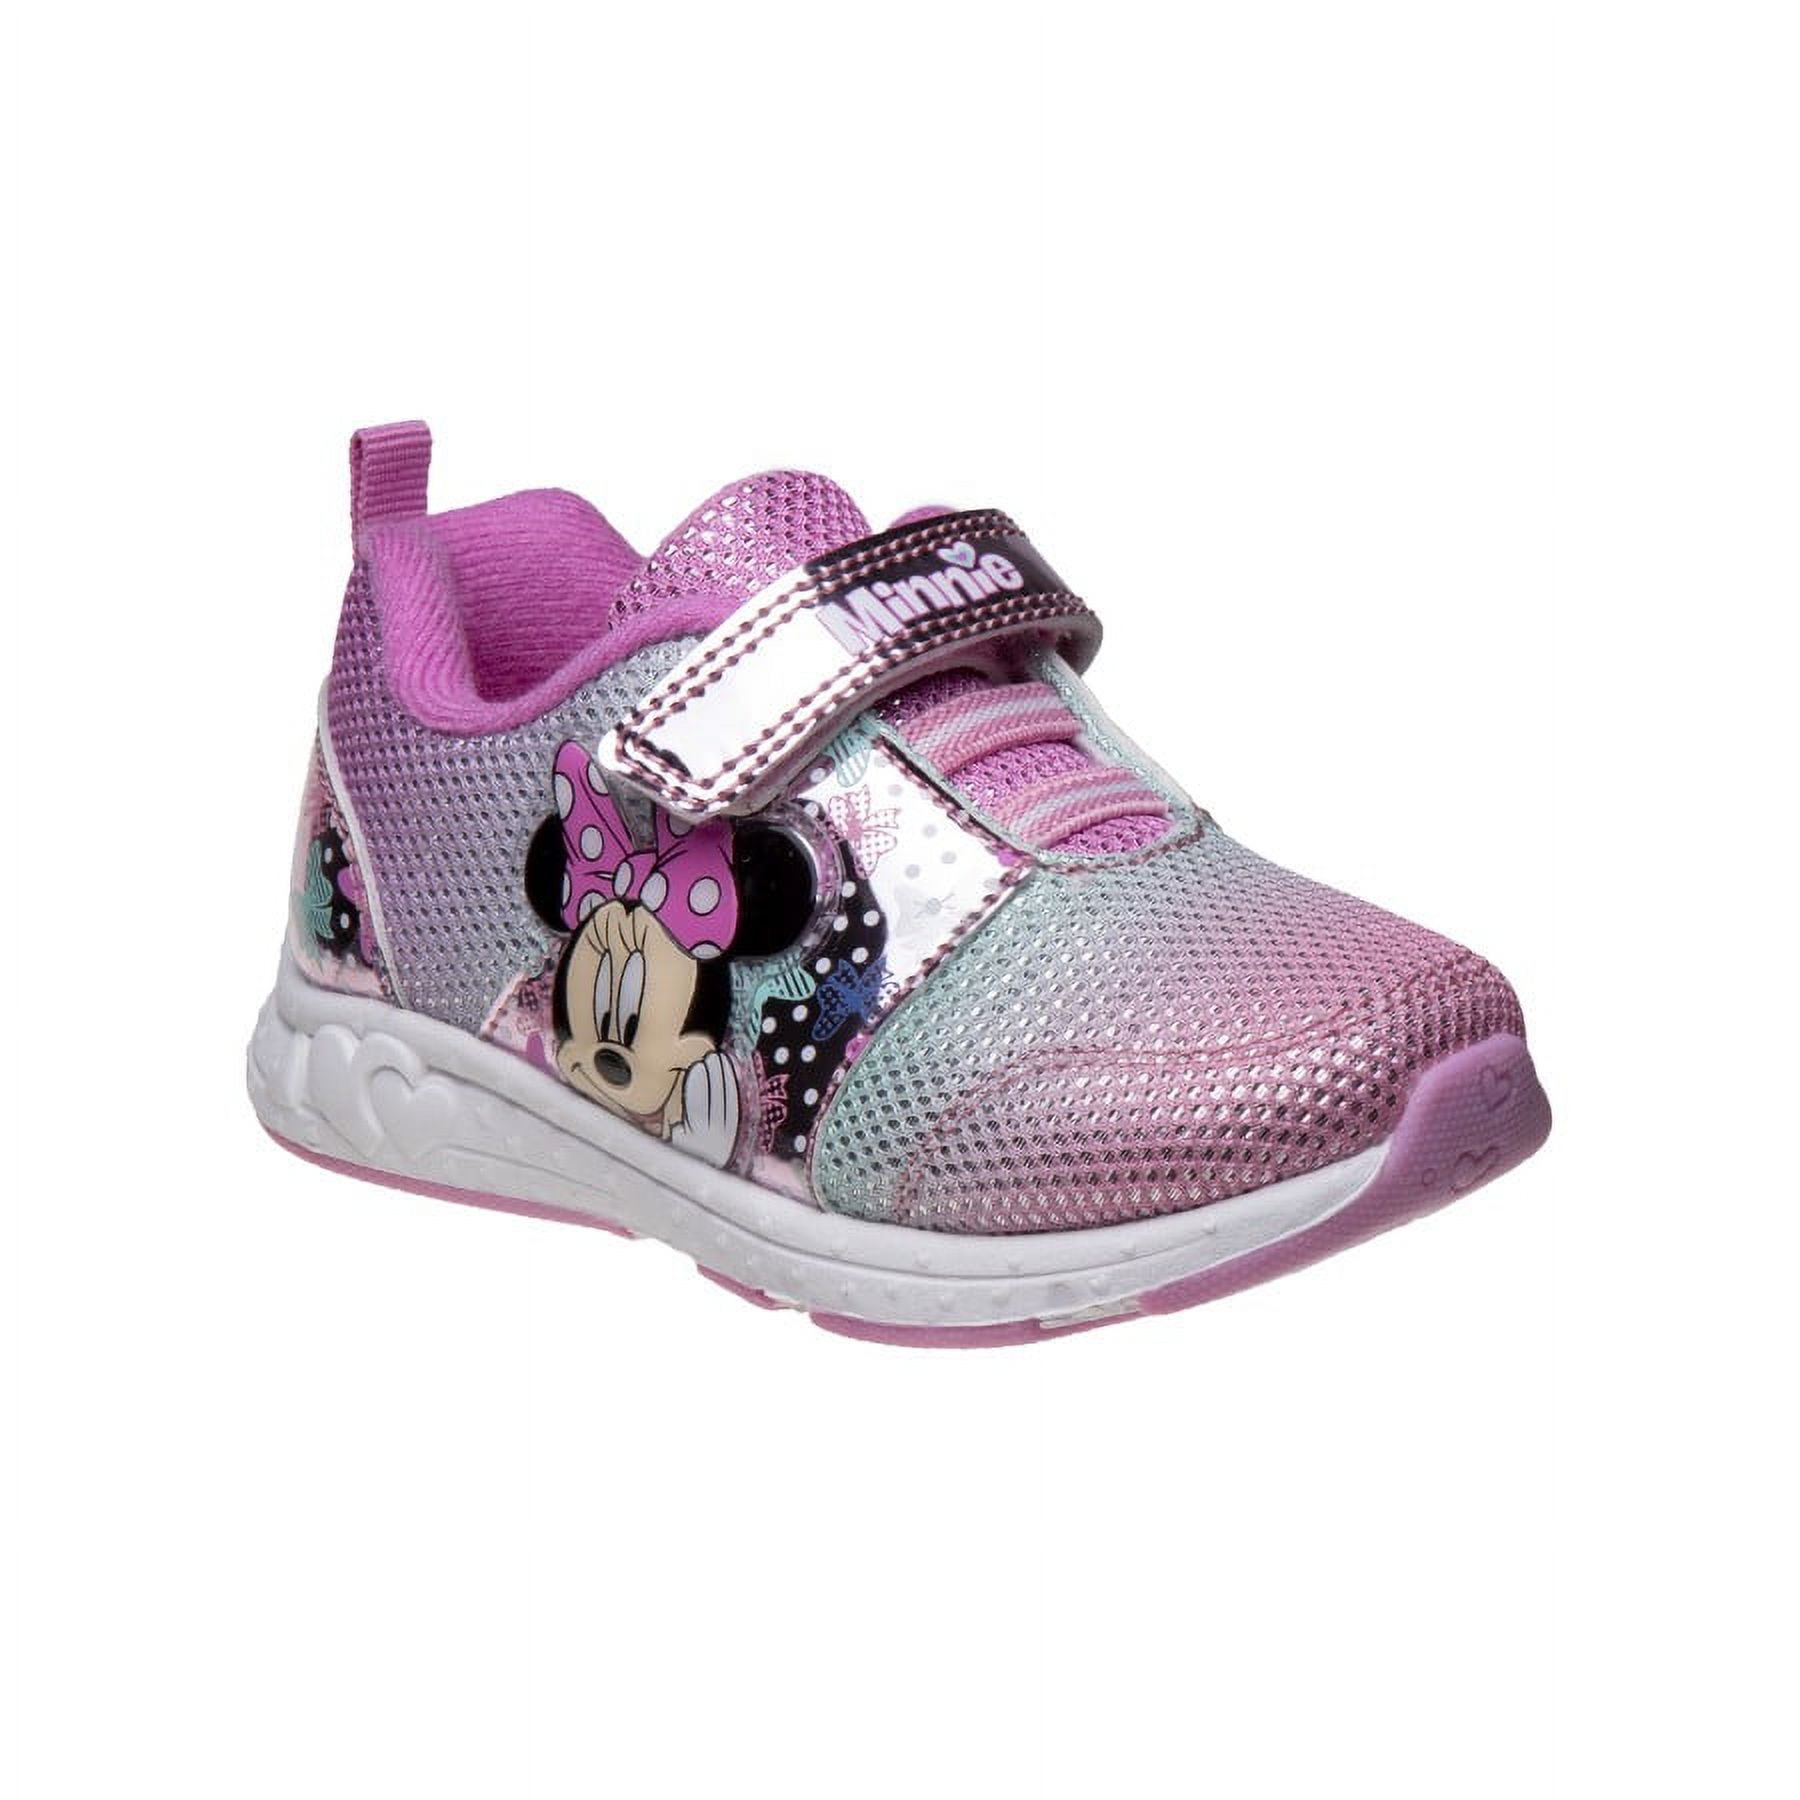 Disney Girl Minnie Mouse one red light Sneakers - Pink, Size: 11 ...